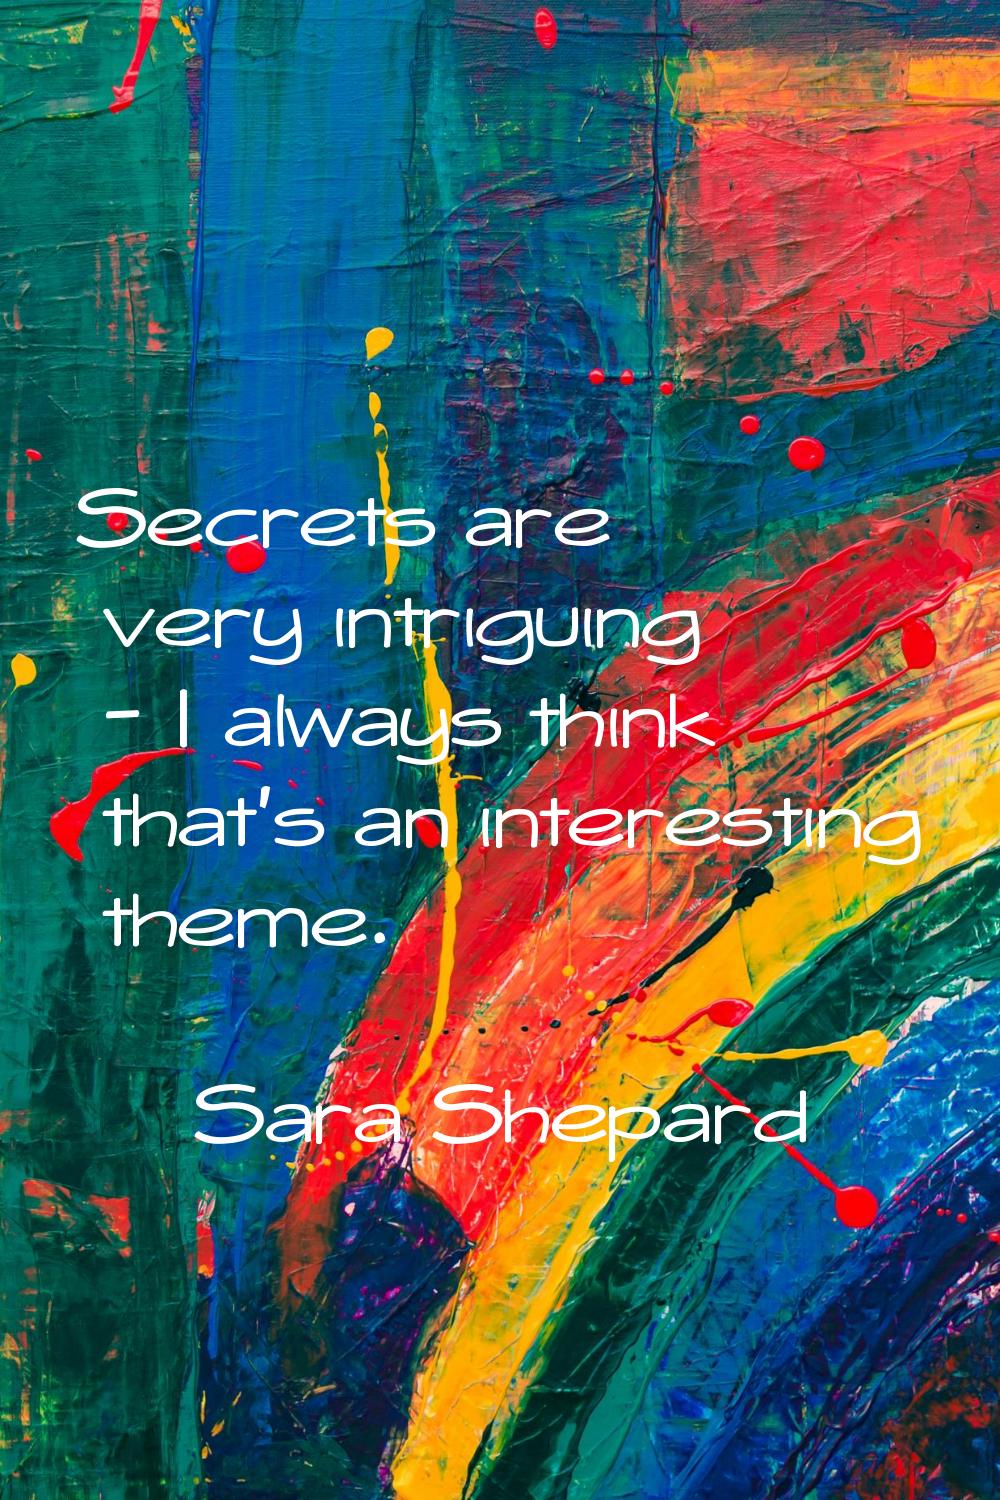 Secrets are very intriguing - I always think that's an interesting theme.